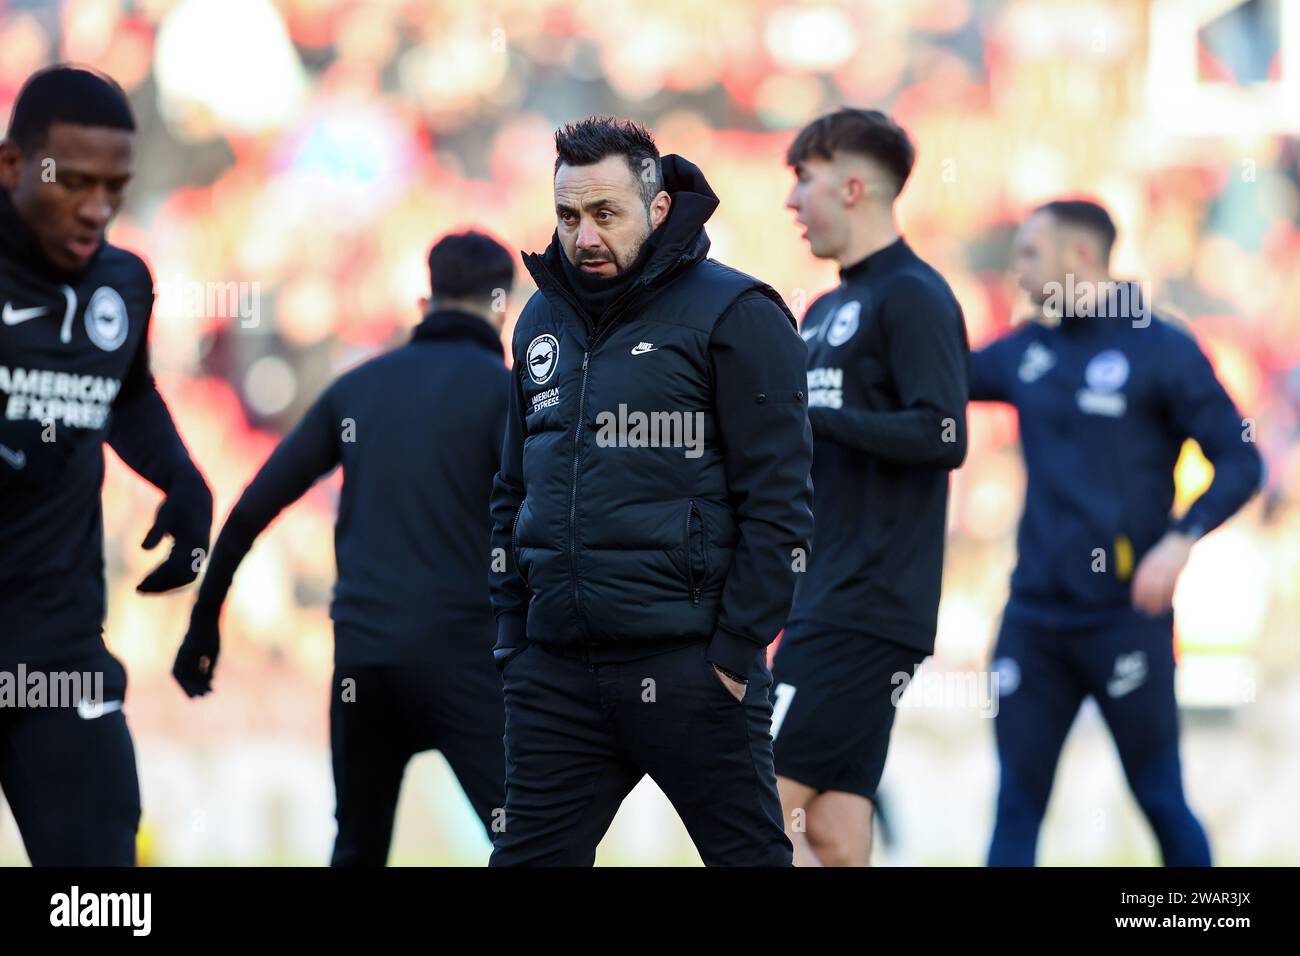 Stoke-on-Trent on Saturday 6th January 2024. Brighton manager Roberto De Zerbi watches his team warm up during the FA Cup Third Round match between Stoke City and Brighton and Hove Albion at the Britannia Stadium, Stoke-on-Trent on Saturday 6th January 2024. (Photo: Chris Donnelly | MI News) Credit: MI News & Sport /Alamy Live News Stock Photo